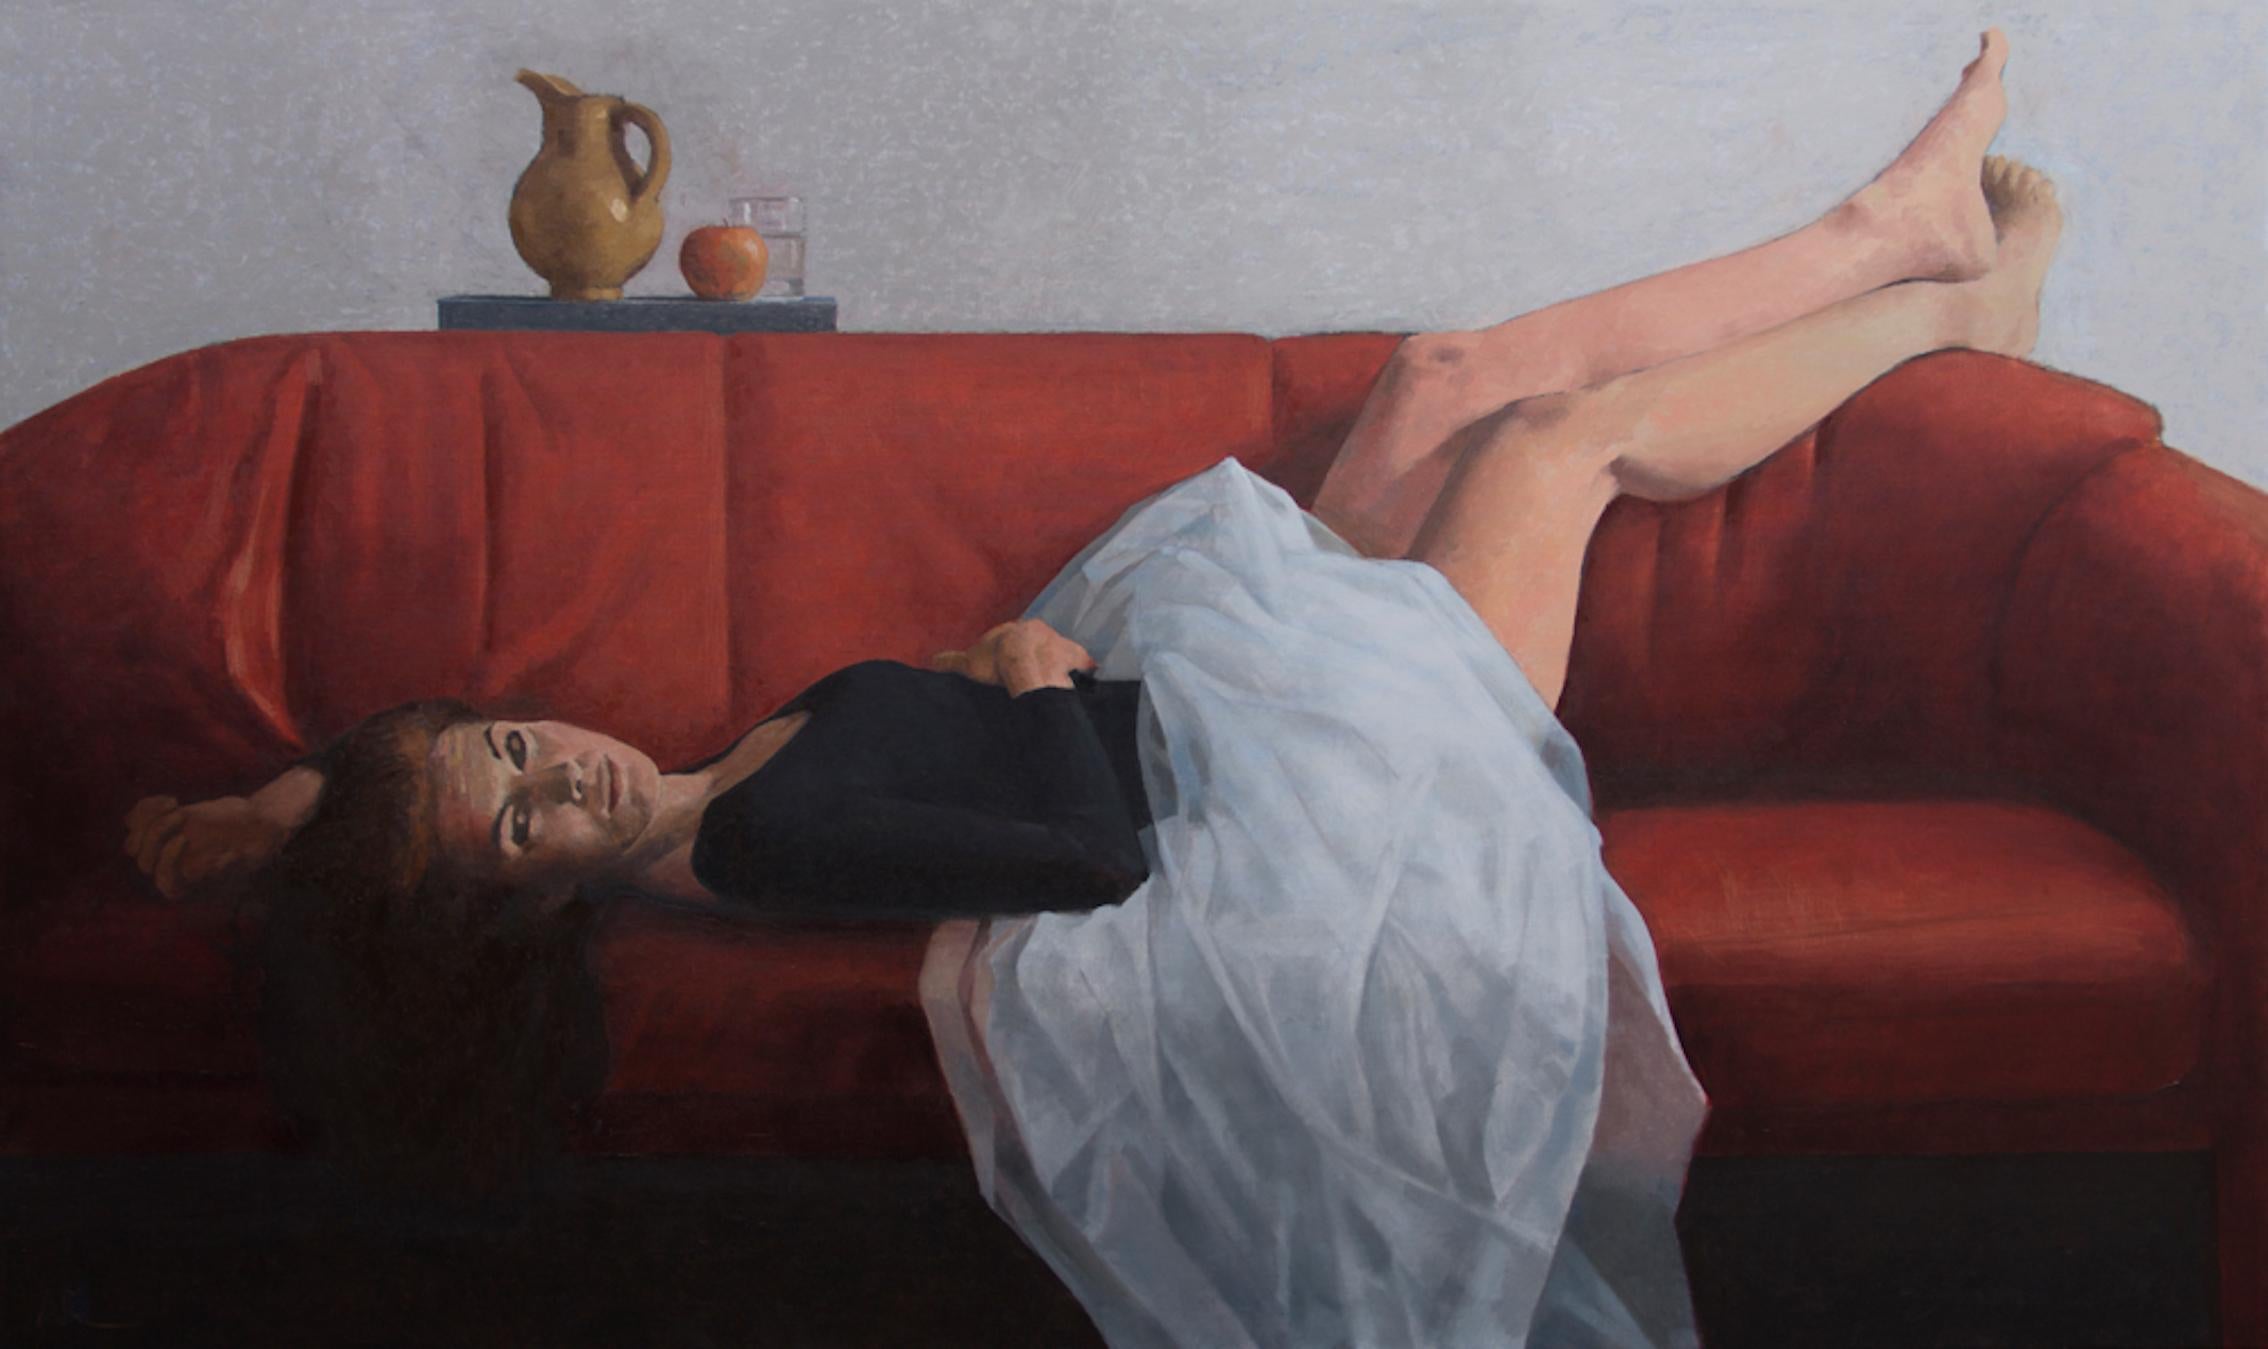 Adolfo Ramon Figurative Painting - Woman with Still-Life - 21st Century Contemporary Oil Painting of Woman on Couch